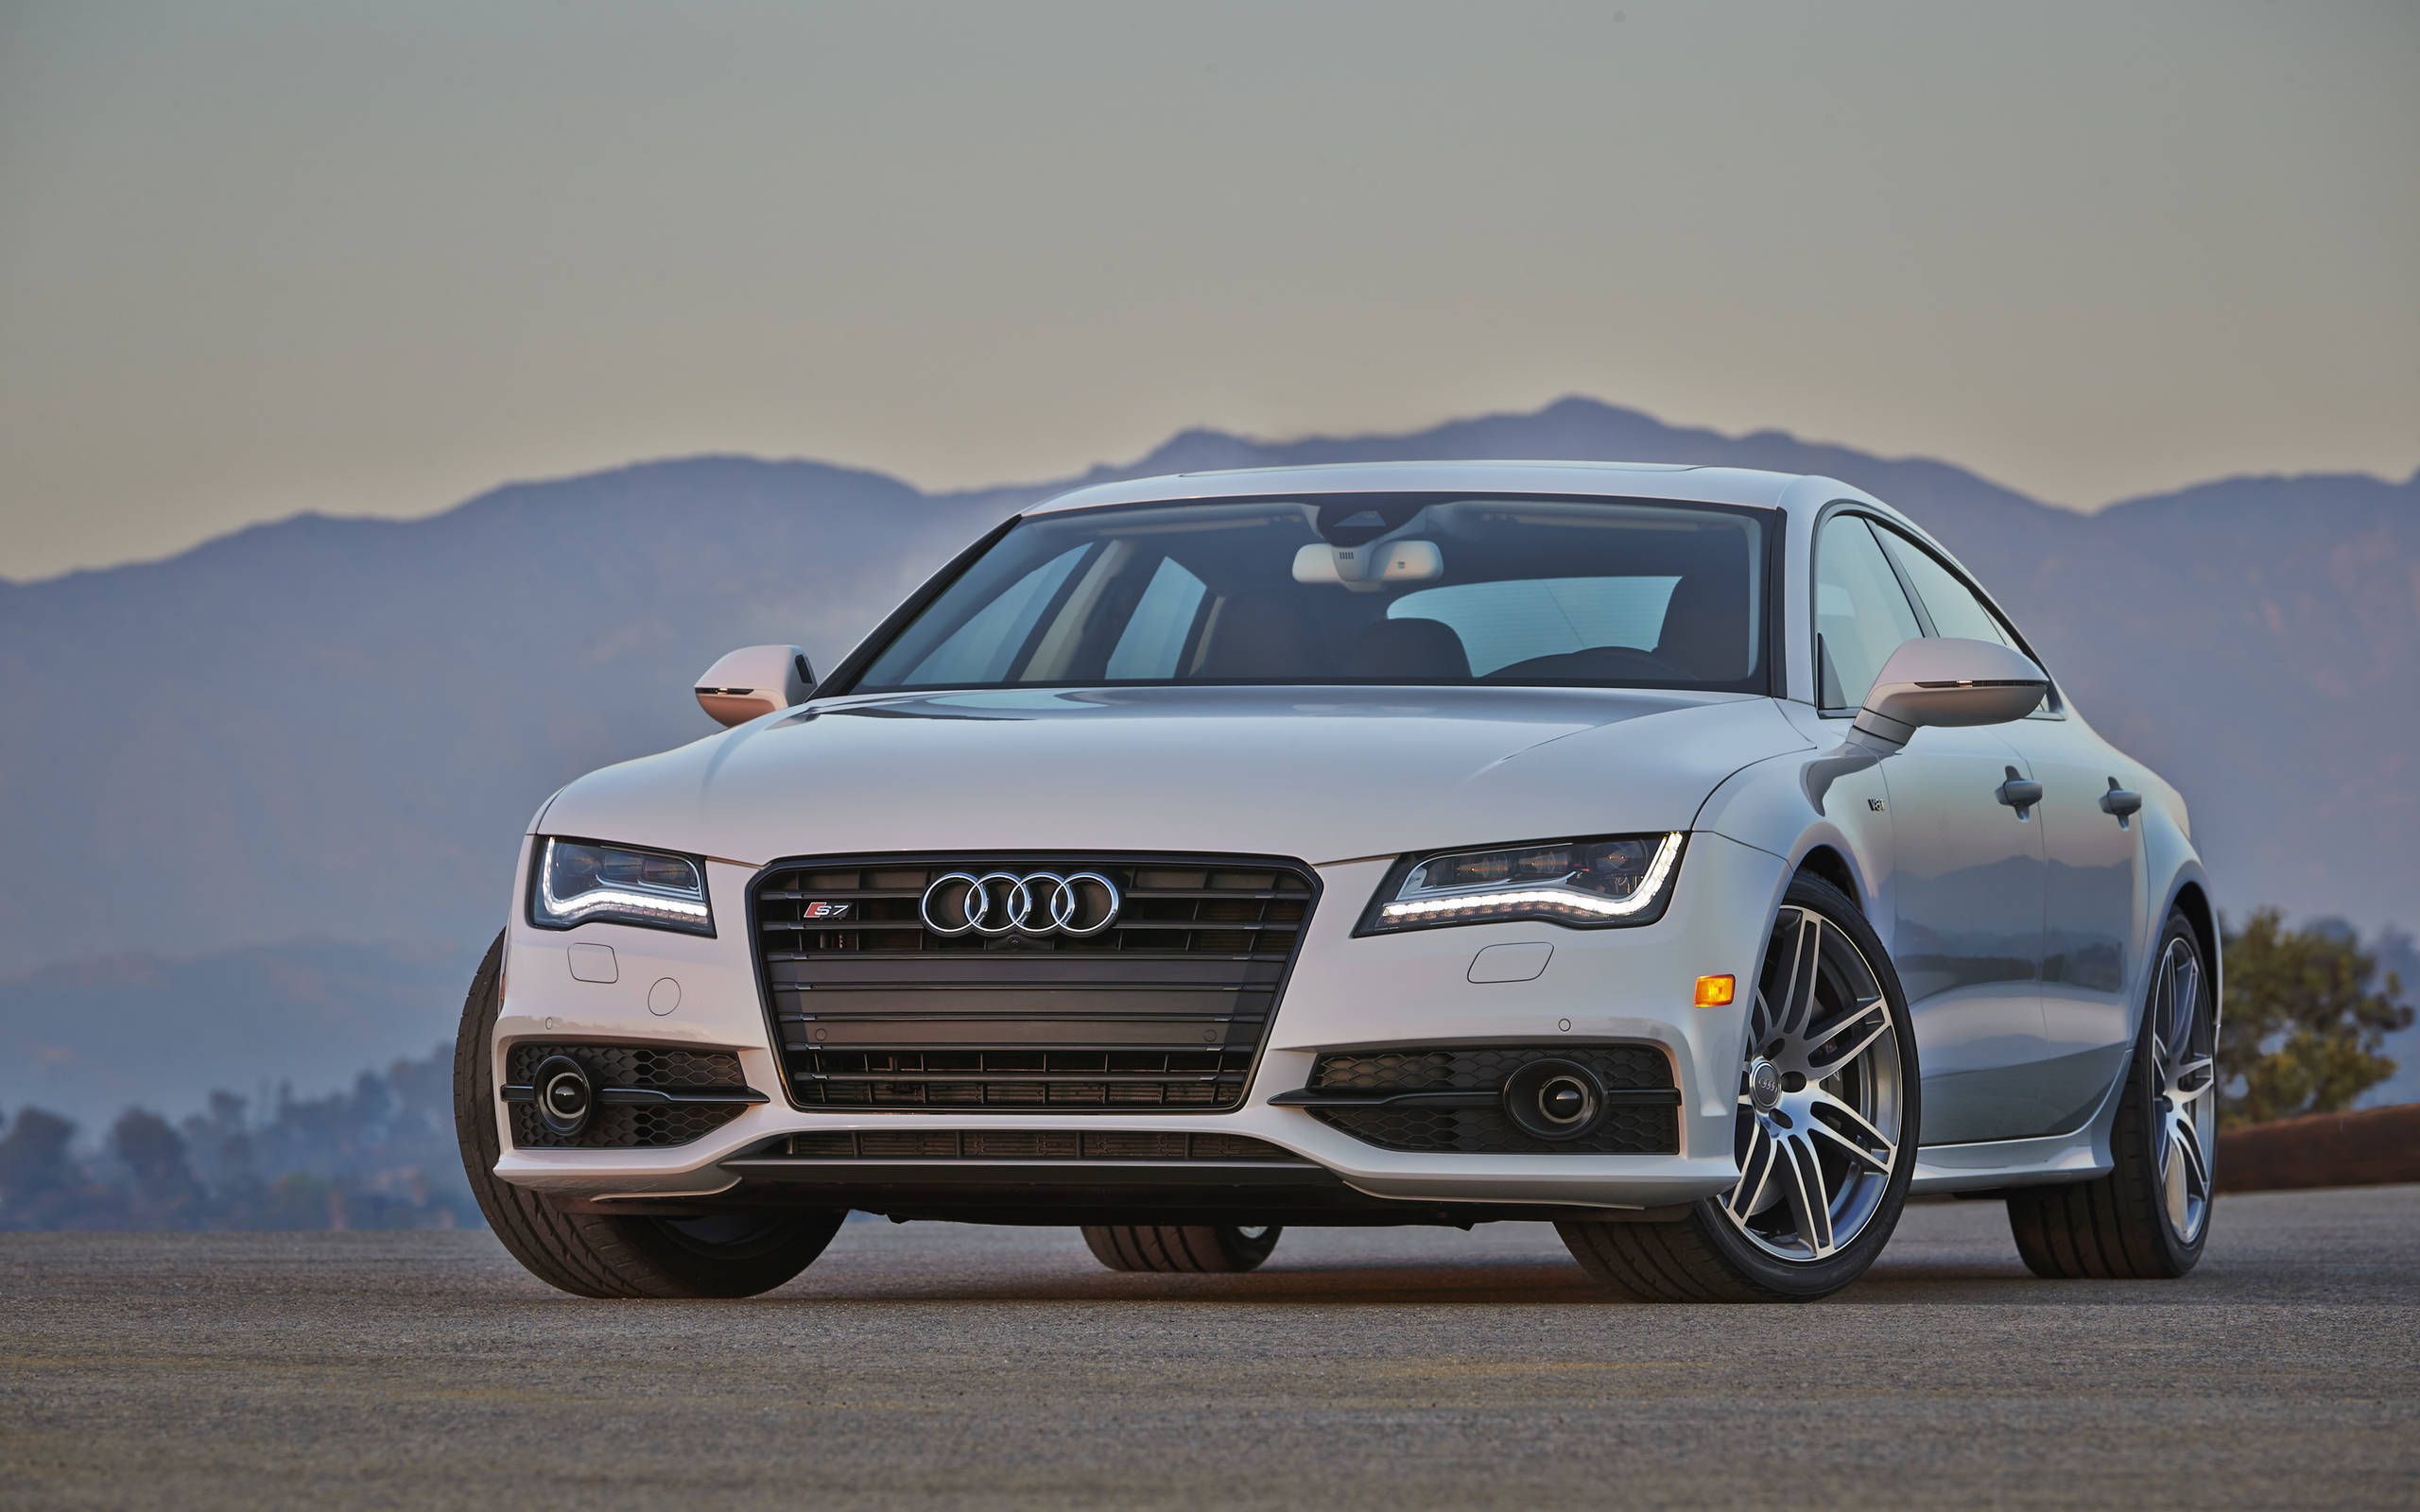 2014 Audi S7 review notes